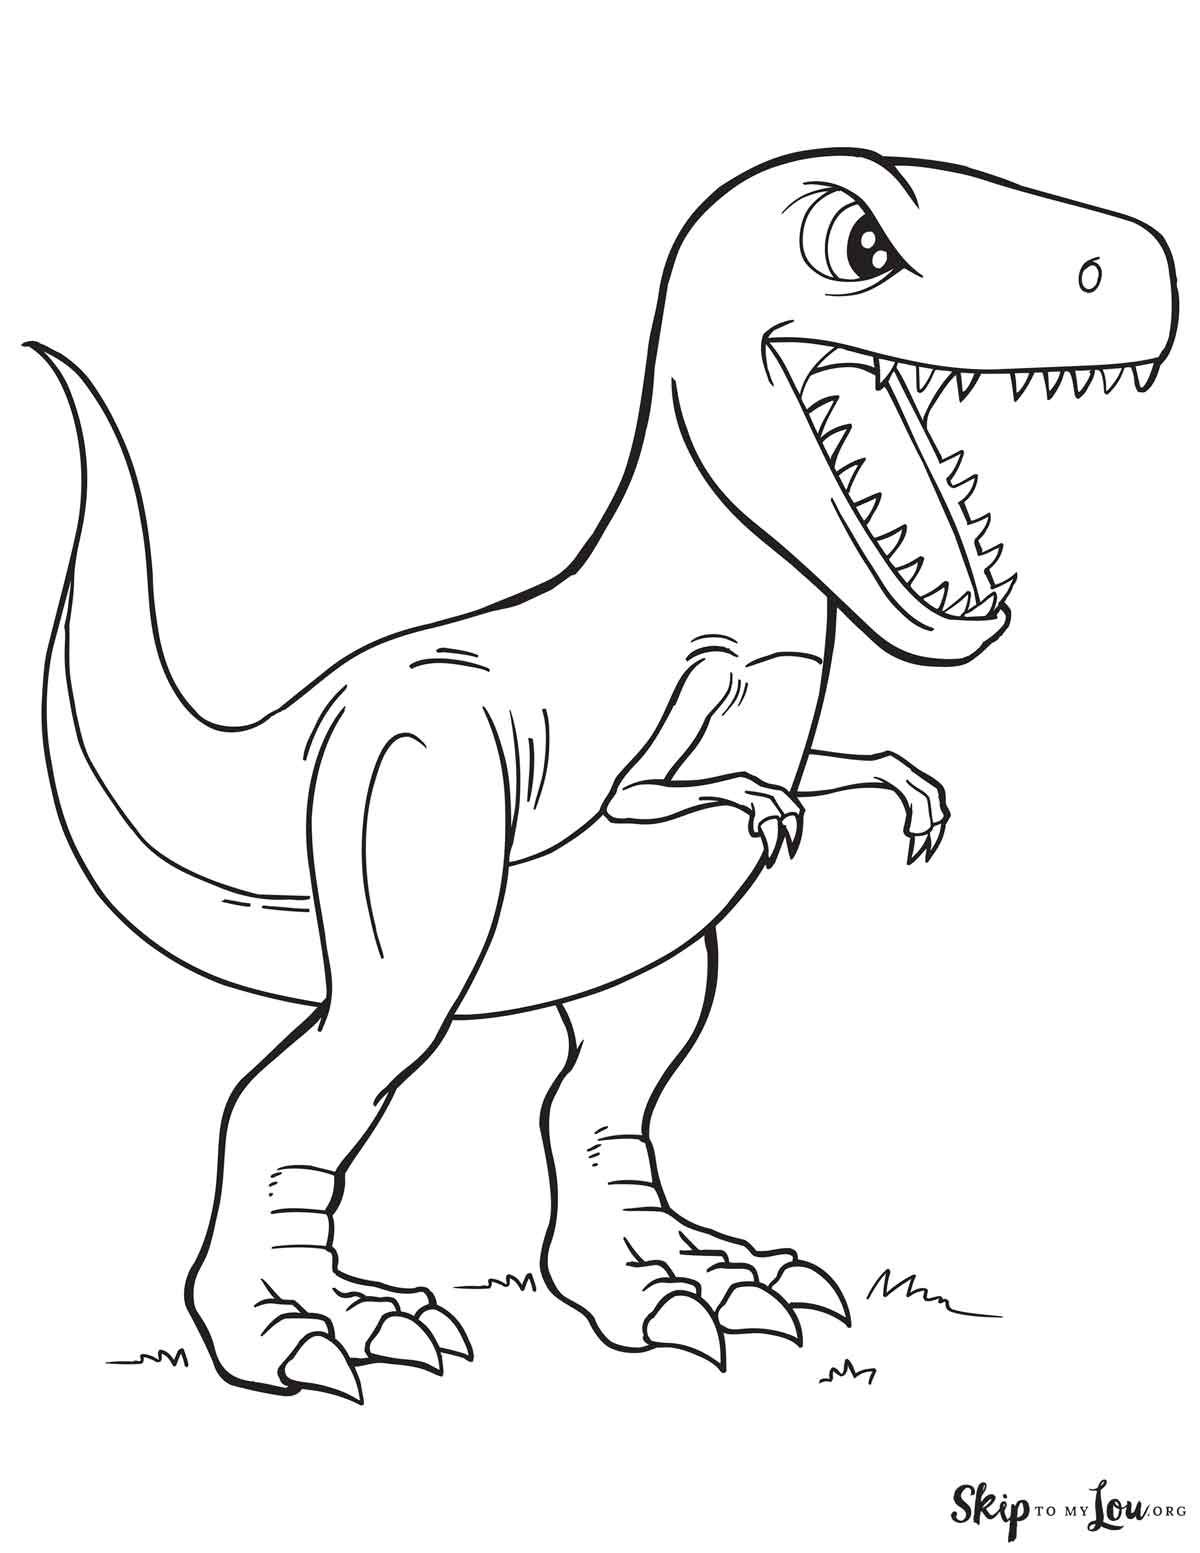 T Rex Coloring Pages | Skip To My Lou